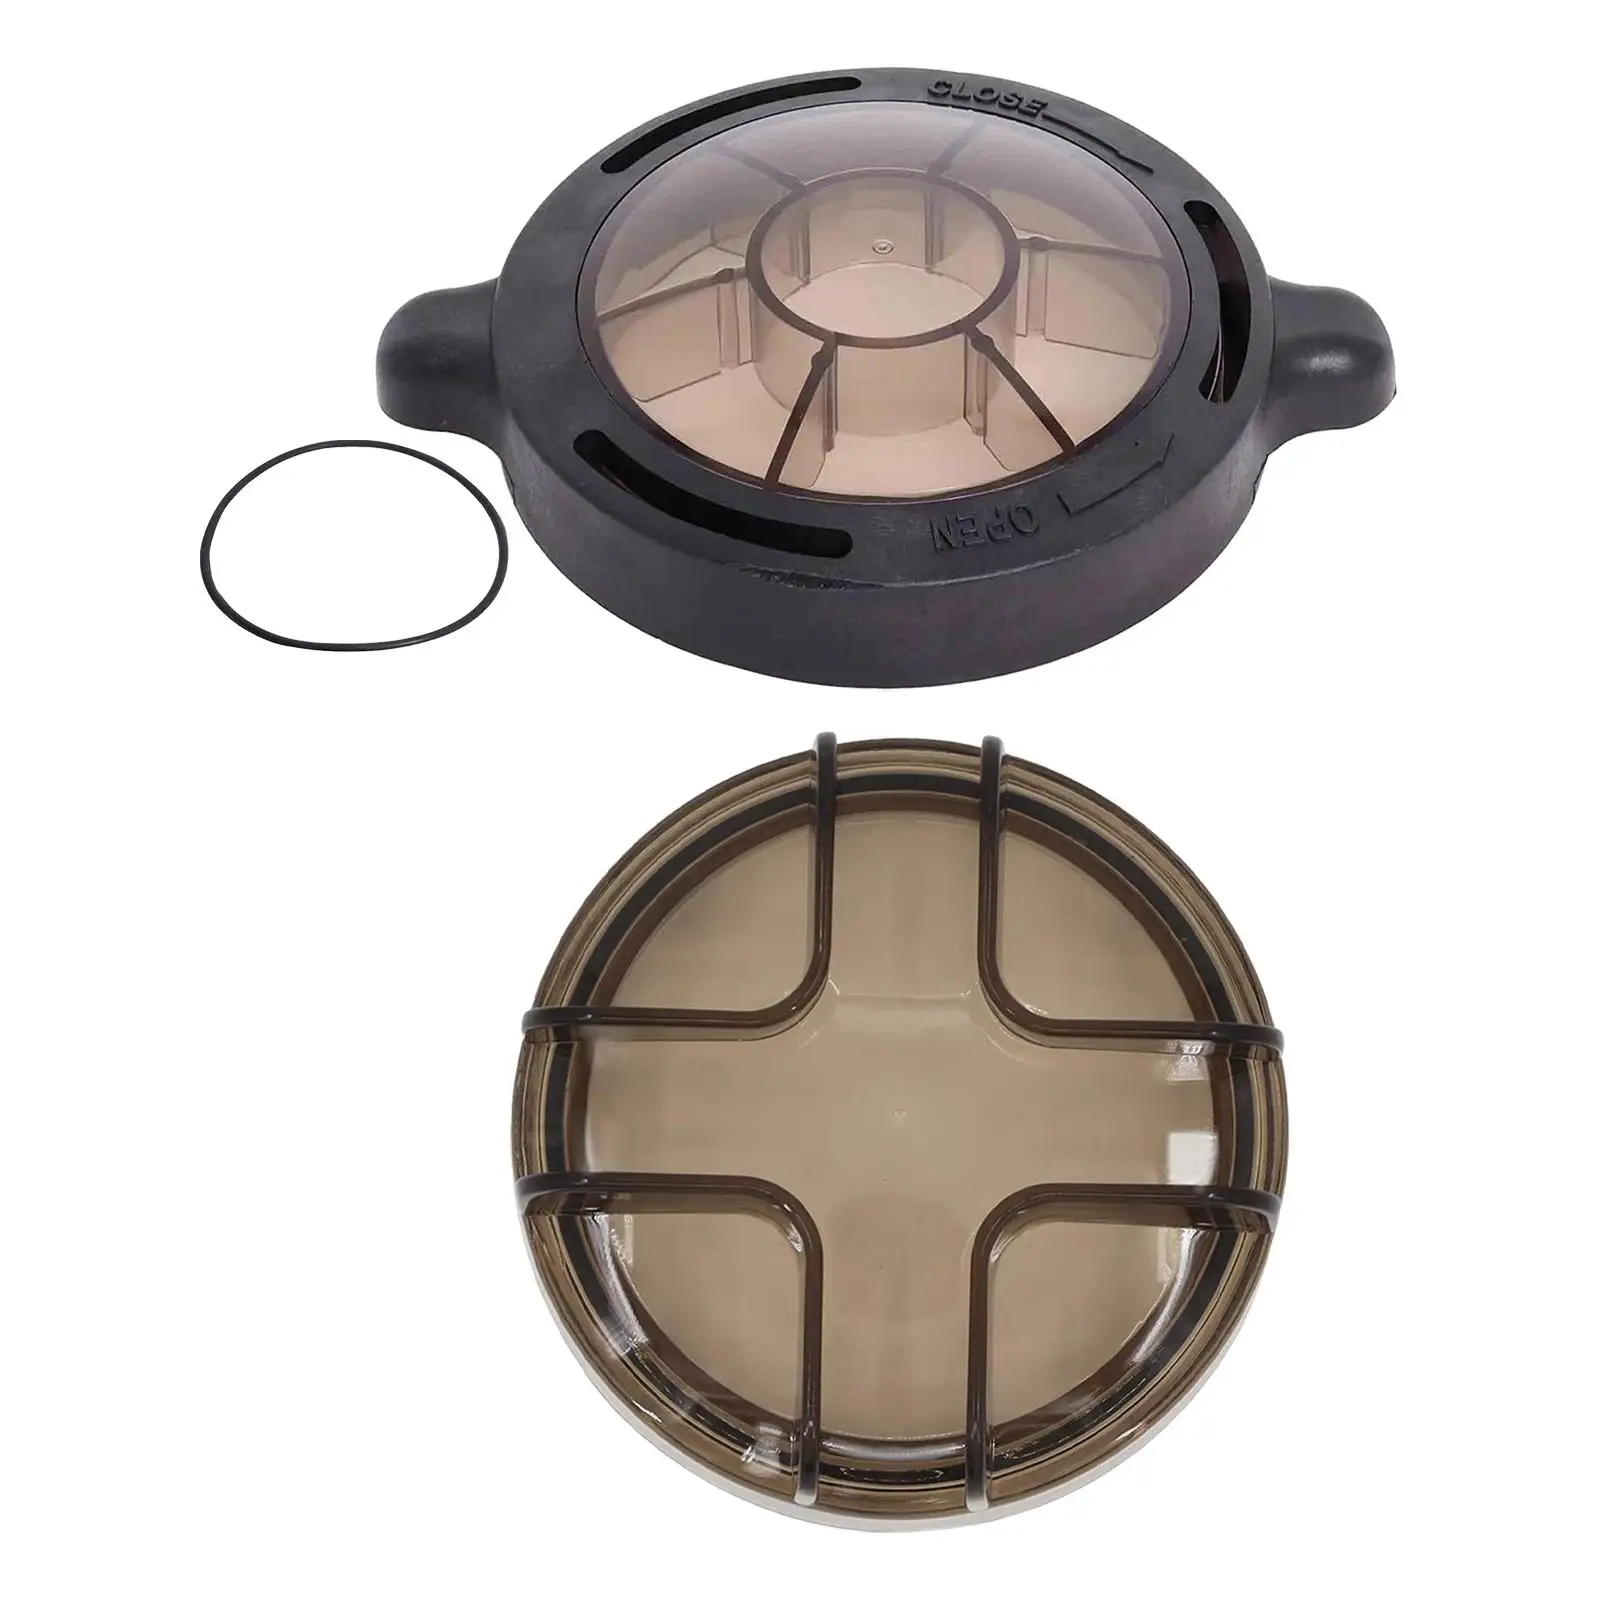 Threaded Strainer Lid Cover Supplies above Ground Swimming Pool Effective Thread Strainer Cover replacement 72743 72744